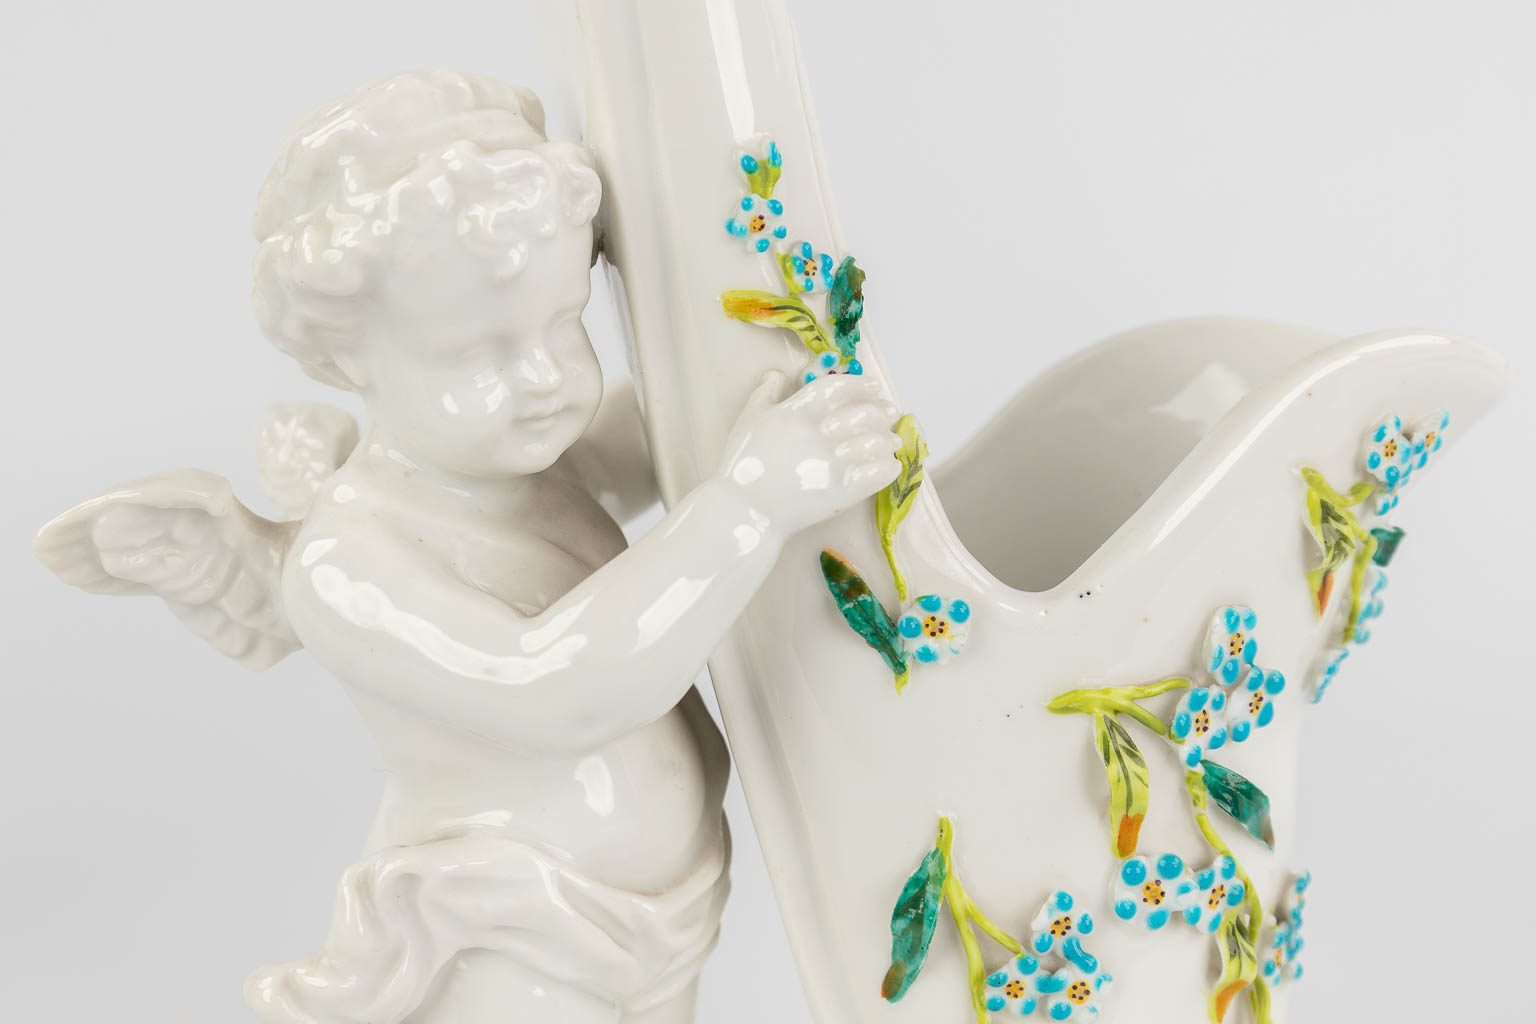 Sitzendorf, A pair of porcelain flower vases in the shape of 2 putti holding a shoe. (L: 12,5 x W: 16 x H: 25 cm)